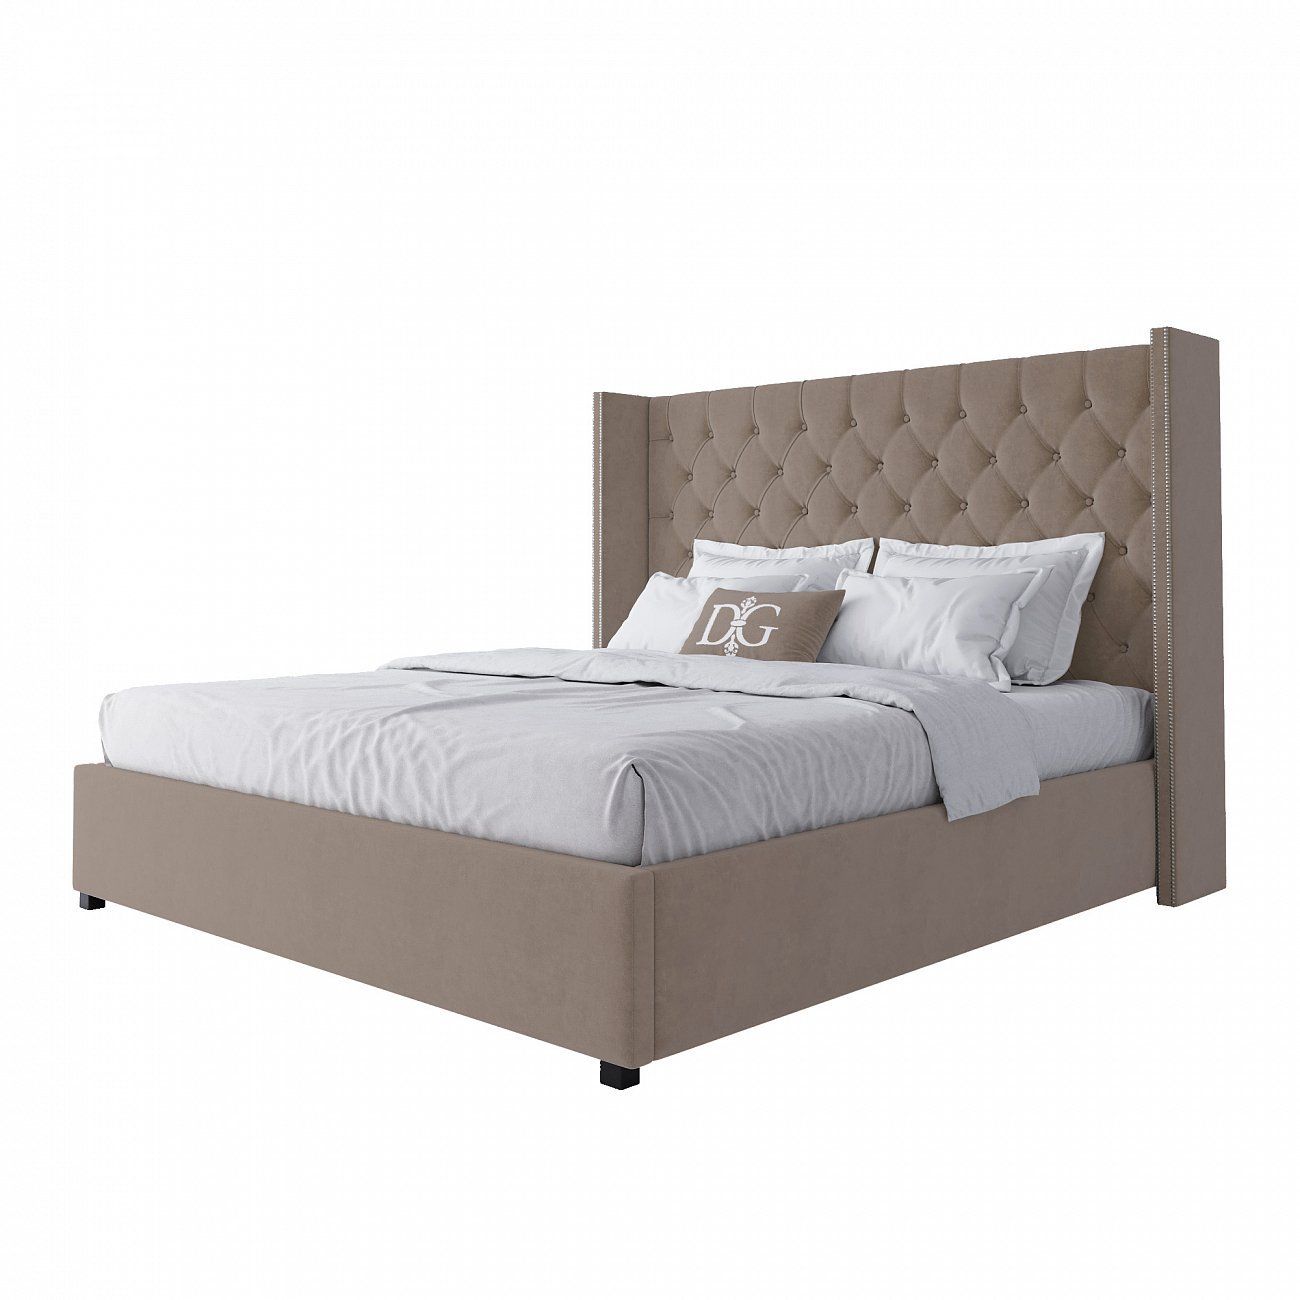 Double bed with upholstered headboard 180x200 cm beige Wing